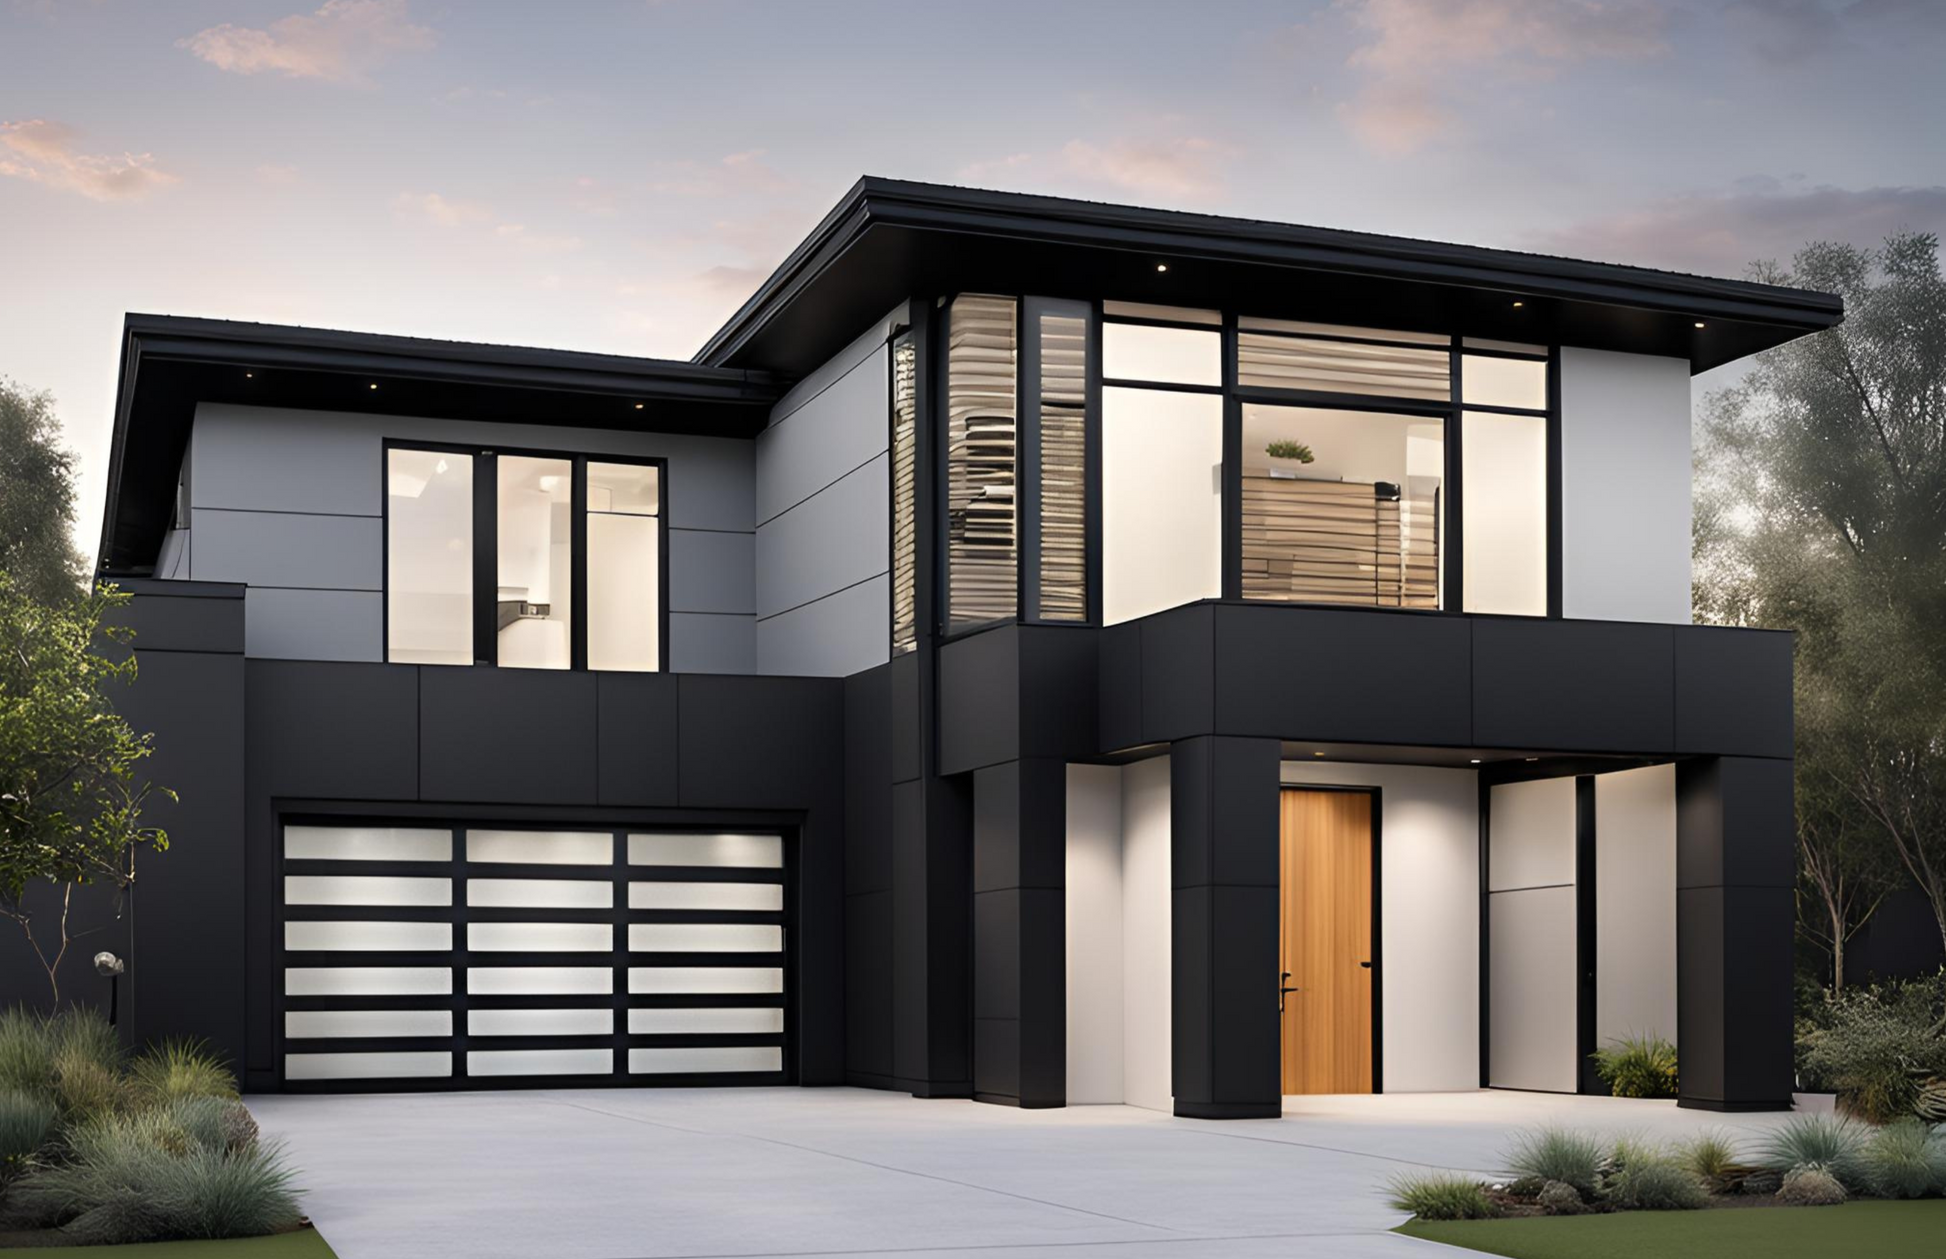 Stunning modern home featuring sleek matte black garage doors with frosted glass, enhancing the architectural design and curb appeal